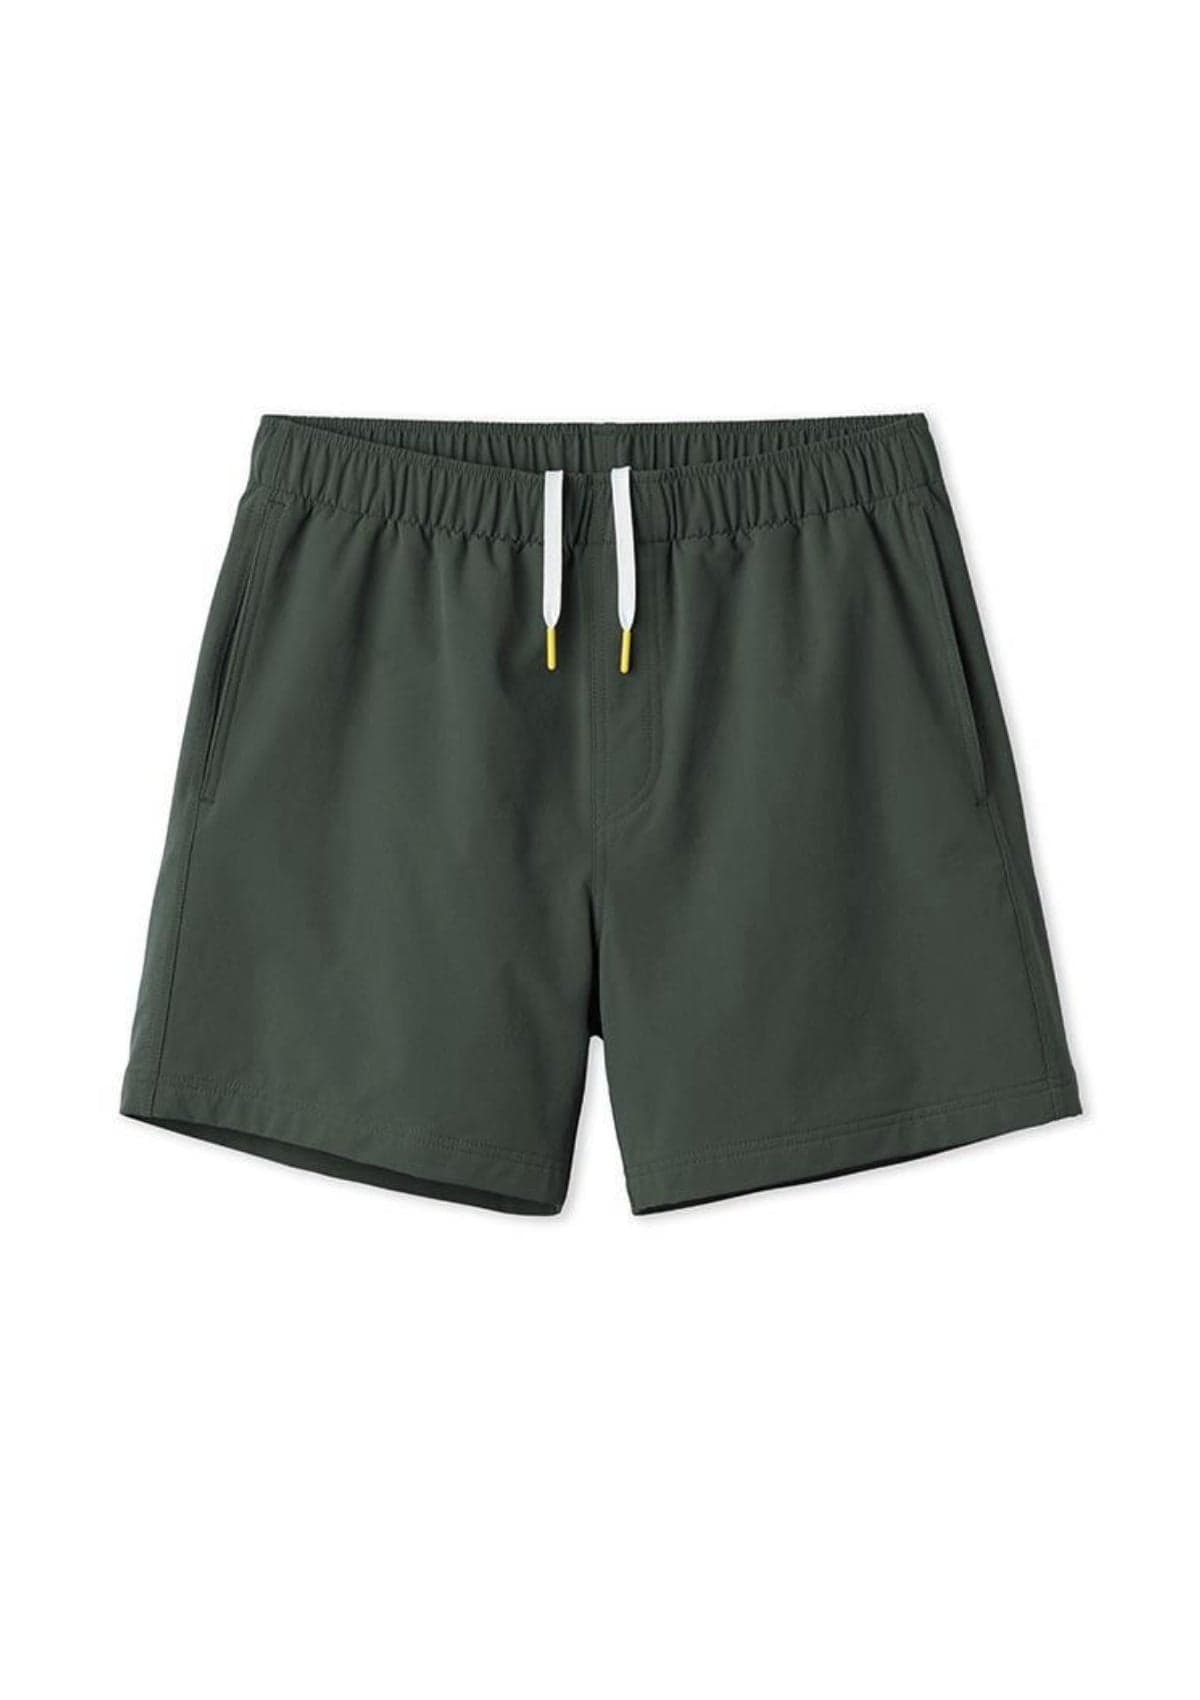 All Over Short 5.5 - Army Green